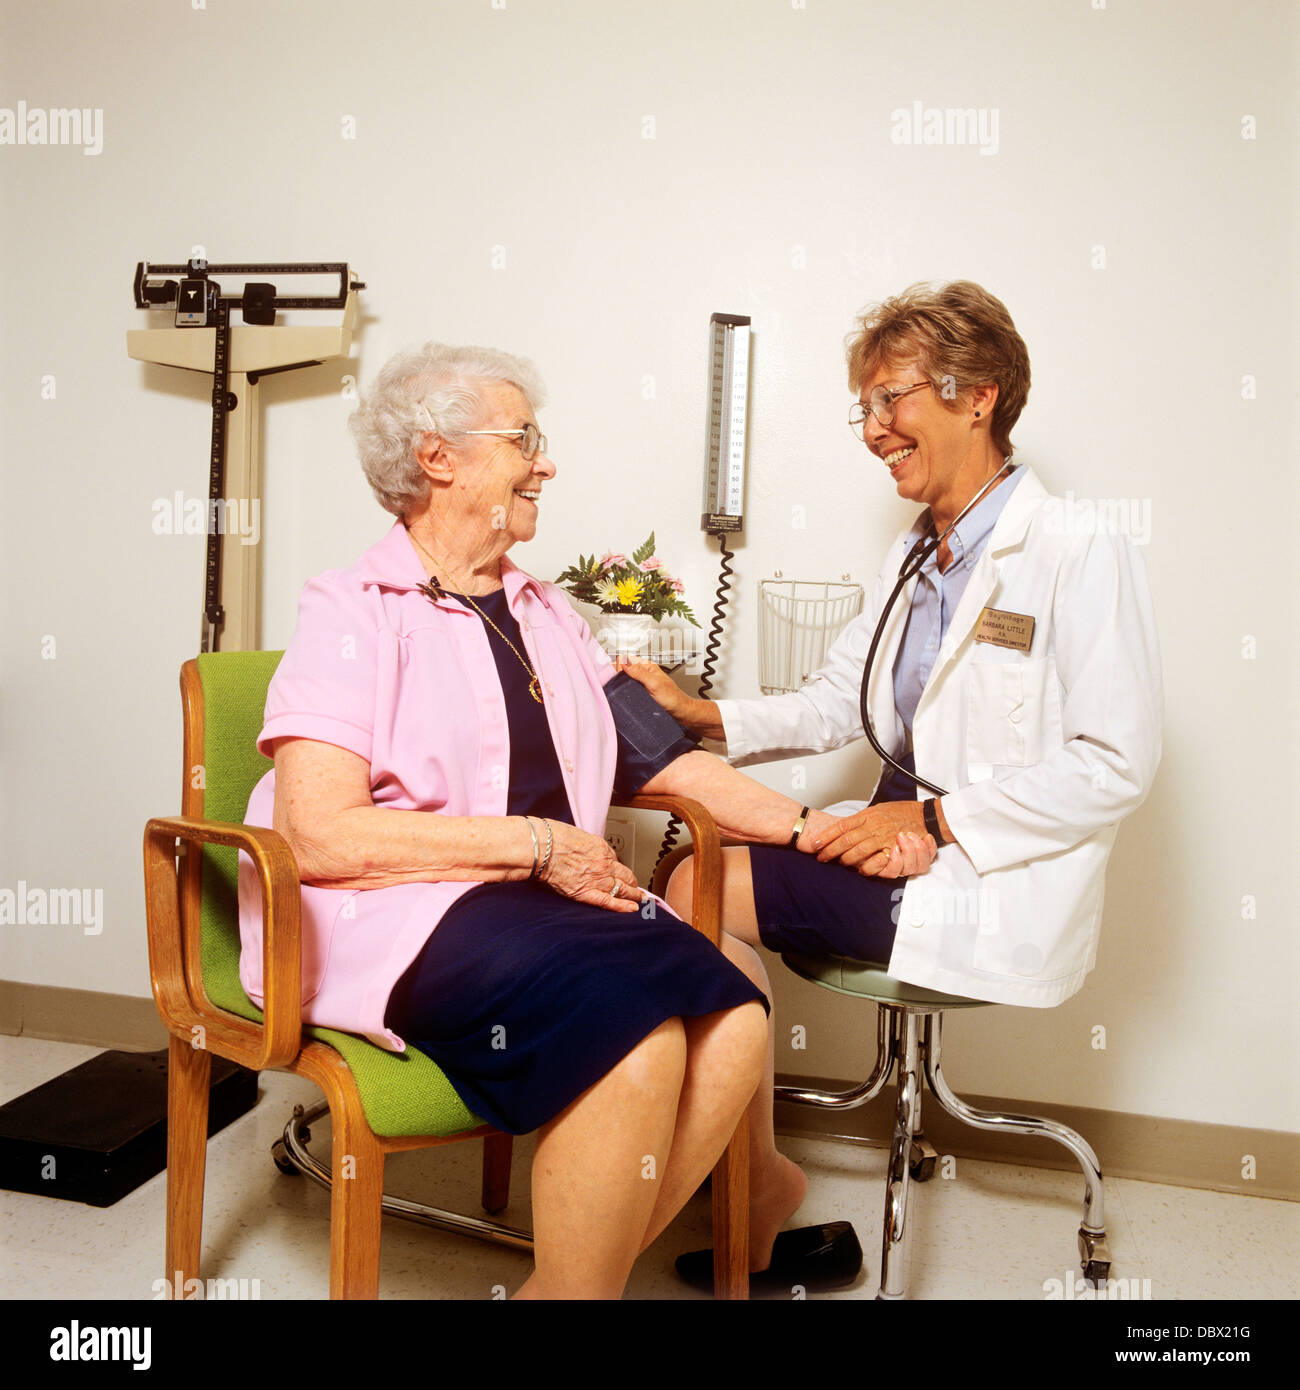 1990s WOMAN NURSE CHECKING BLOOD PRESSURE OF ELDERLY WOMAN PATIENT Stock Photo